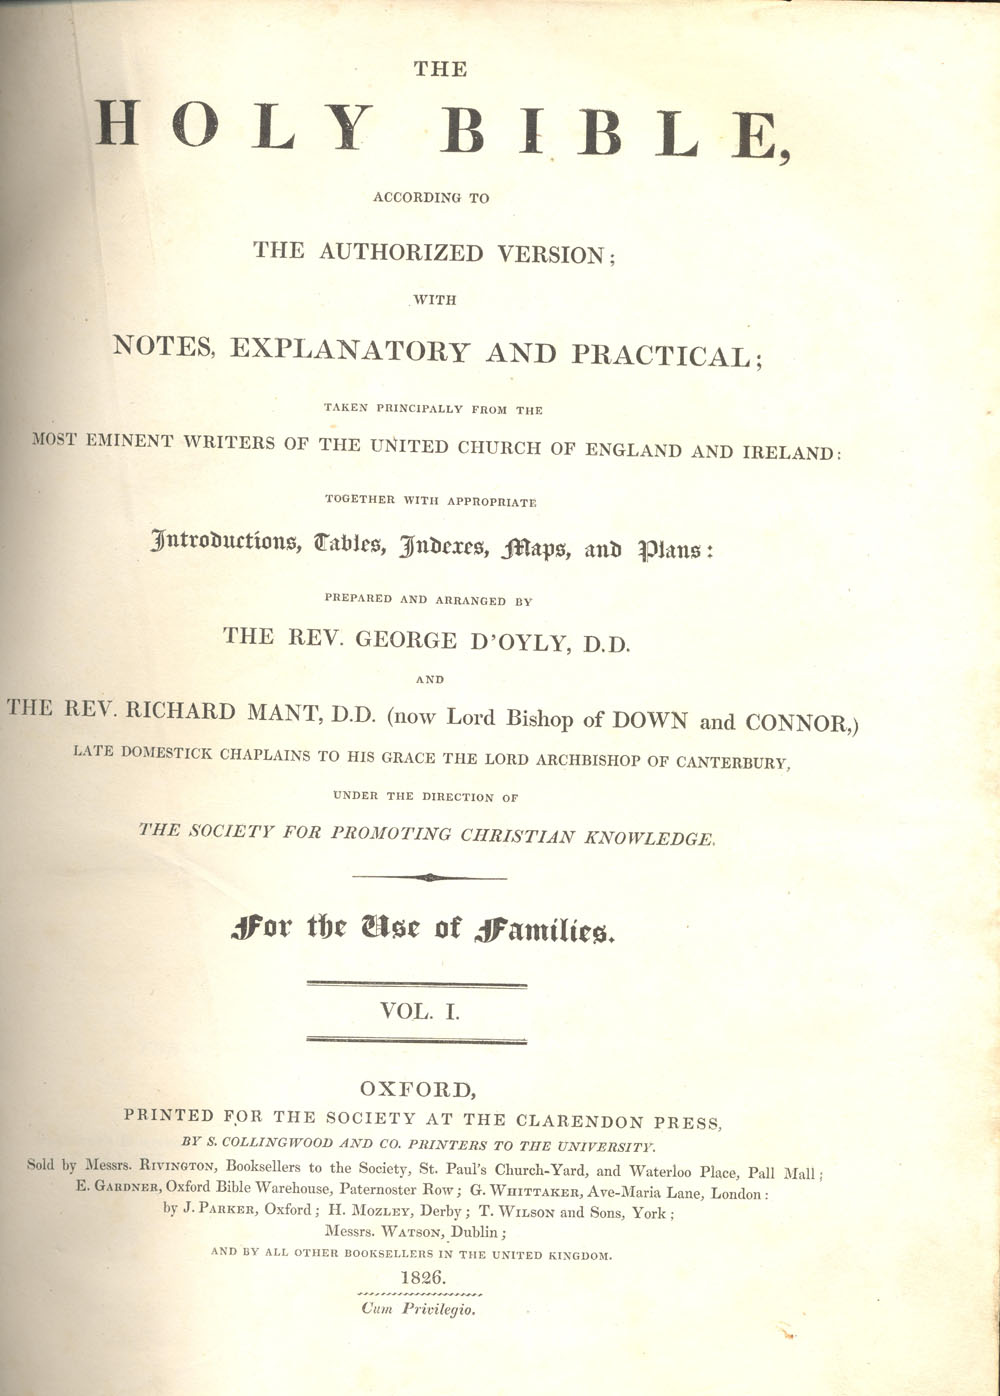 Holy Bible, printed under the direction of the Society for Promoting Christian Knowledge in 1826, for the use of families, with prepared notes and input from Bishop Mant.